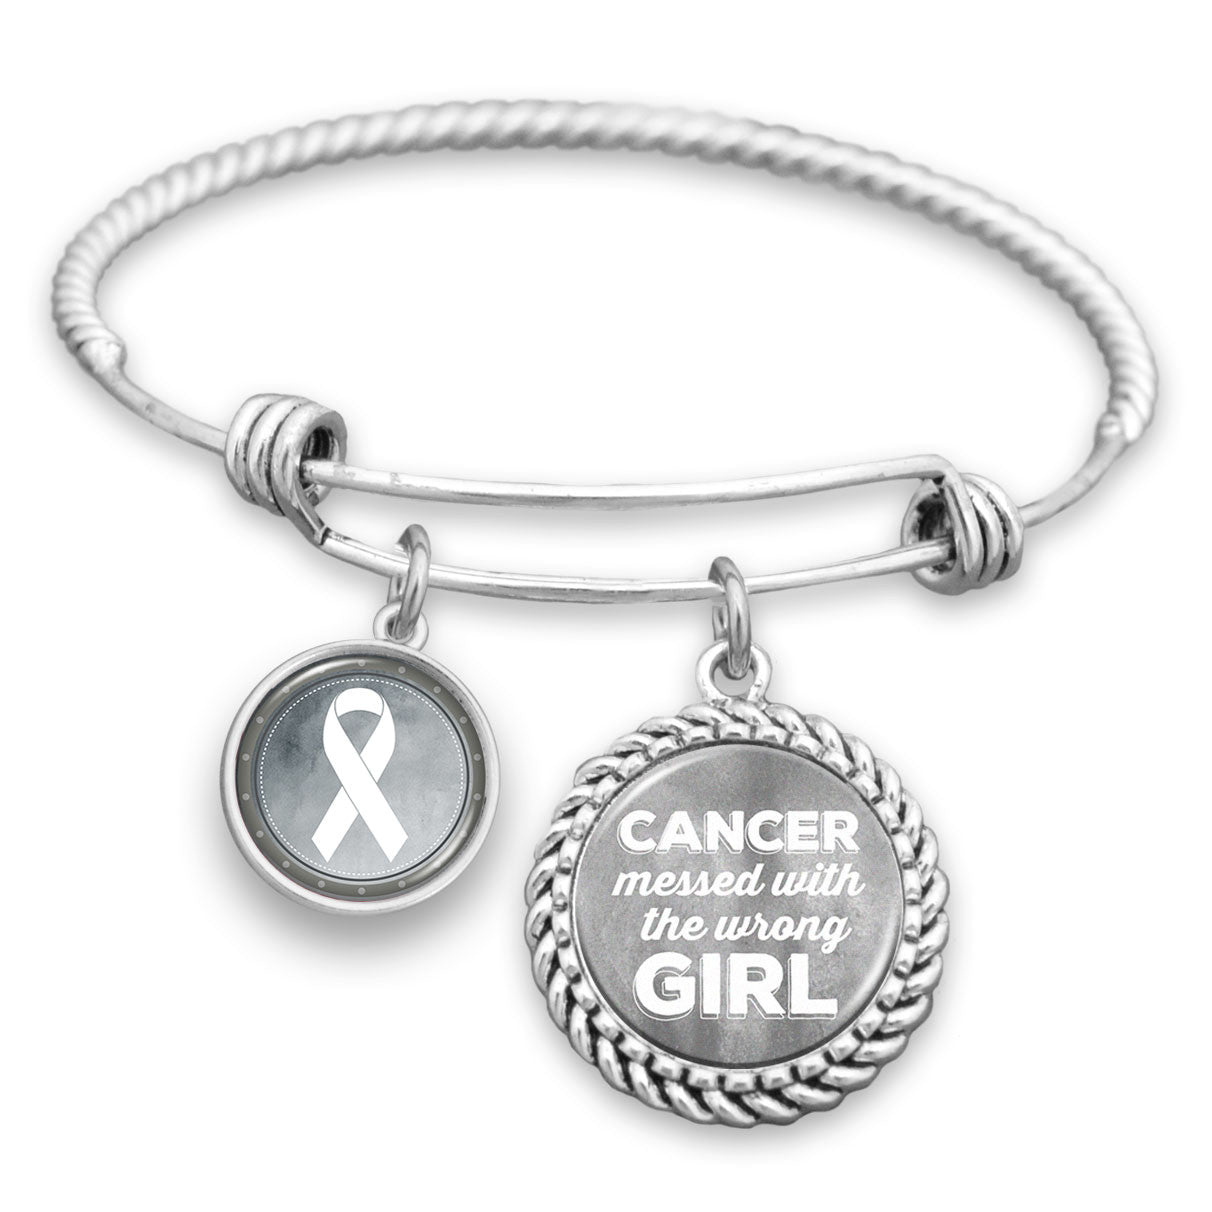 Lung Cancer Awareness "Cancer Messed With The Wrong Girl" Charm Bracelet